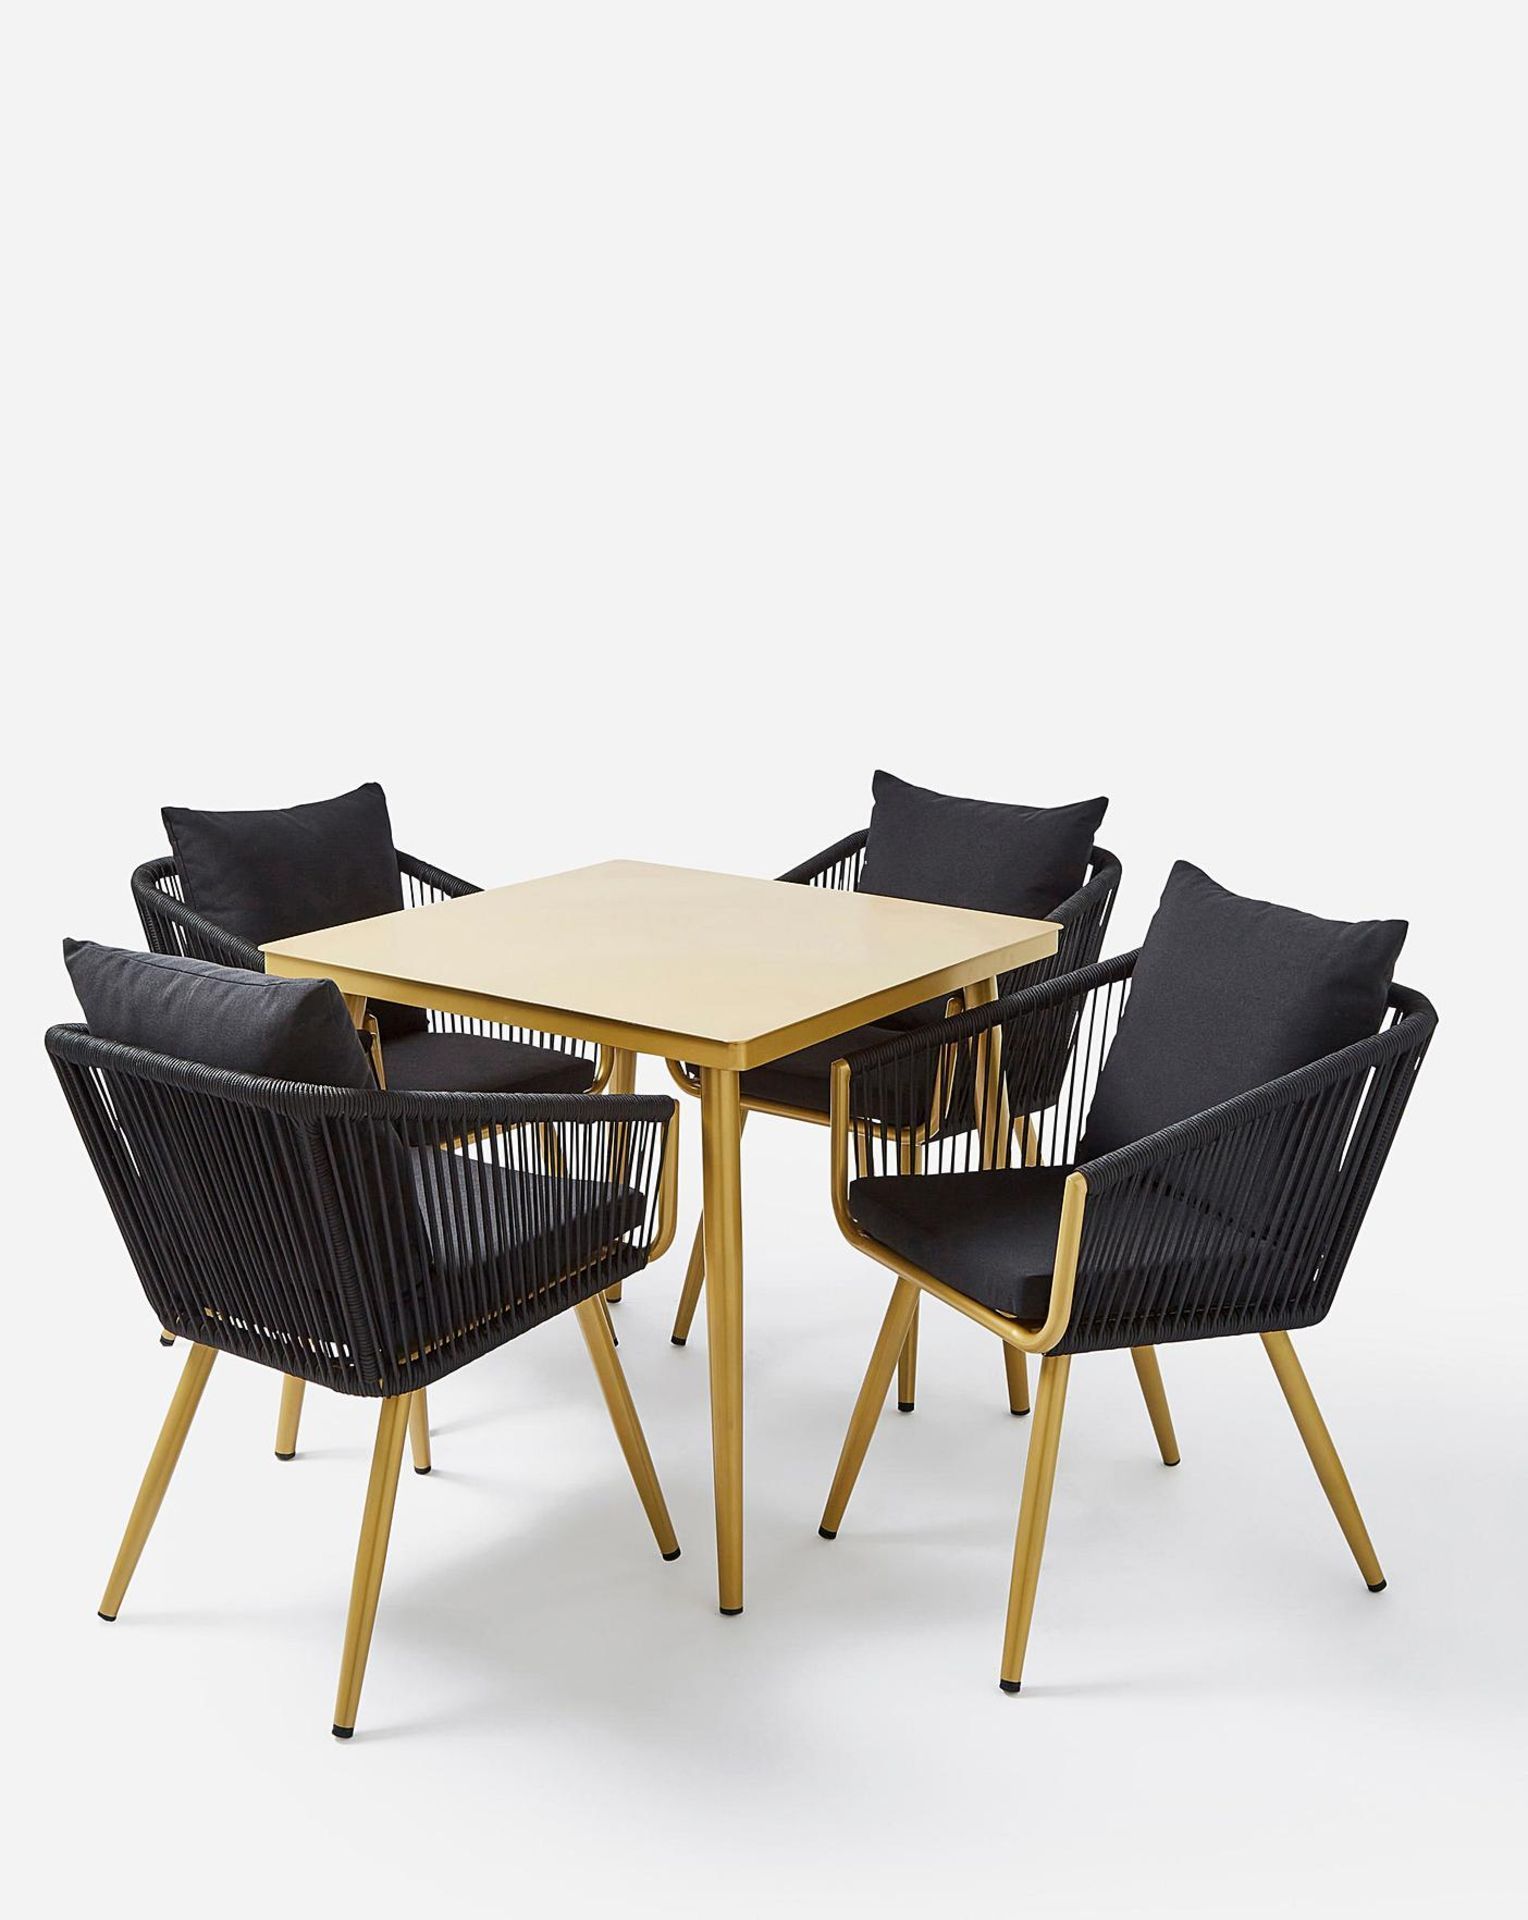 Trade Lot 4 x New & Packaged Joanna Hope Naya 4 Seater Dining Sets. RRP £719 each. This Exclusive - Image 9 of 11